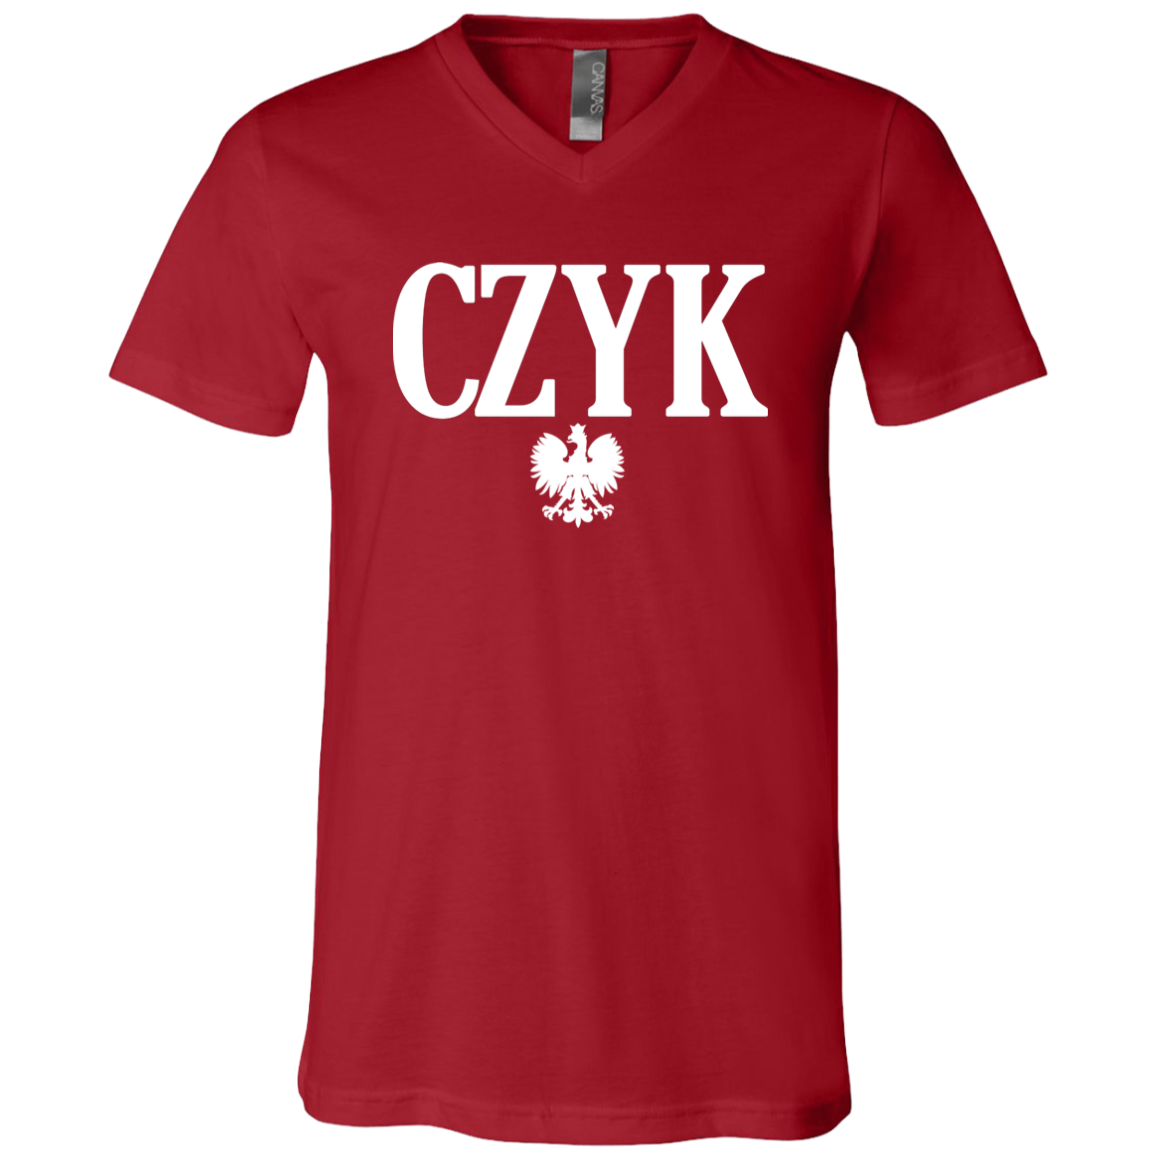 CZYK Polish Surname Ending Apparel CustomCat 3005 Unisex Jersey SS V-Neck T-Shirt Canvas Red X-Small